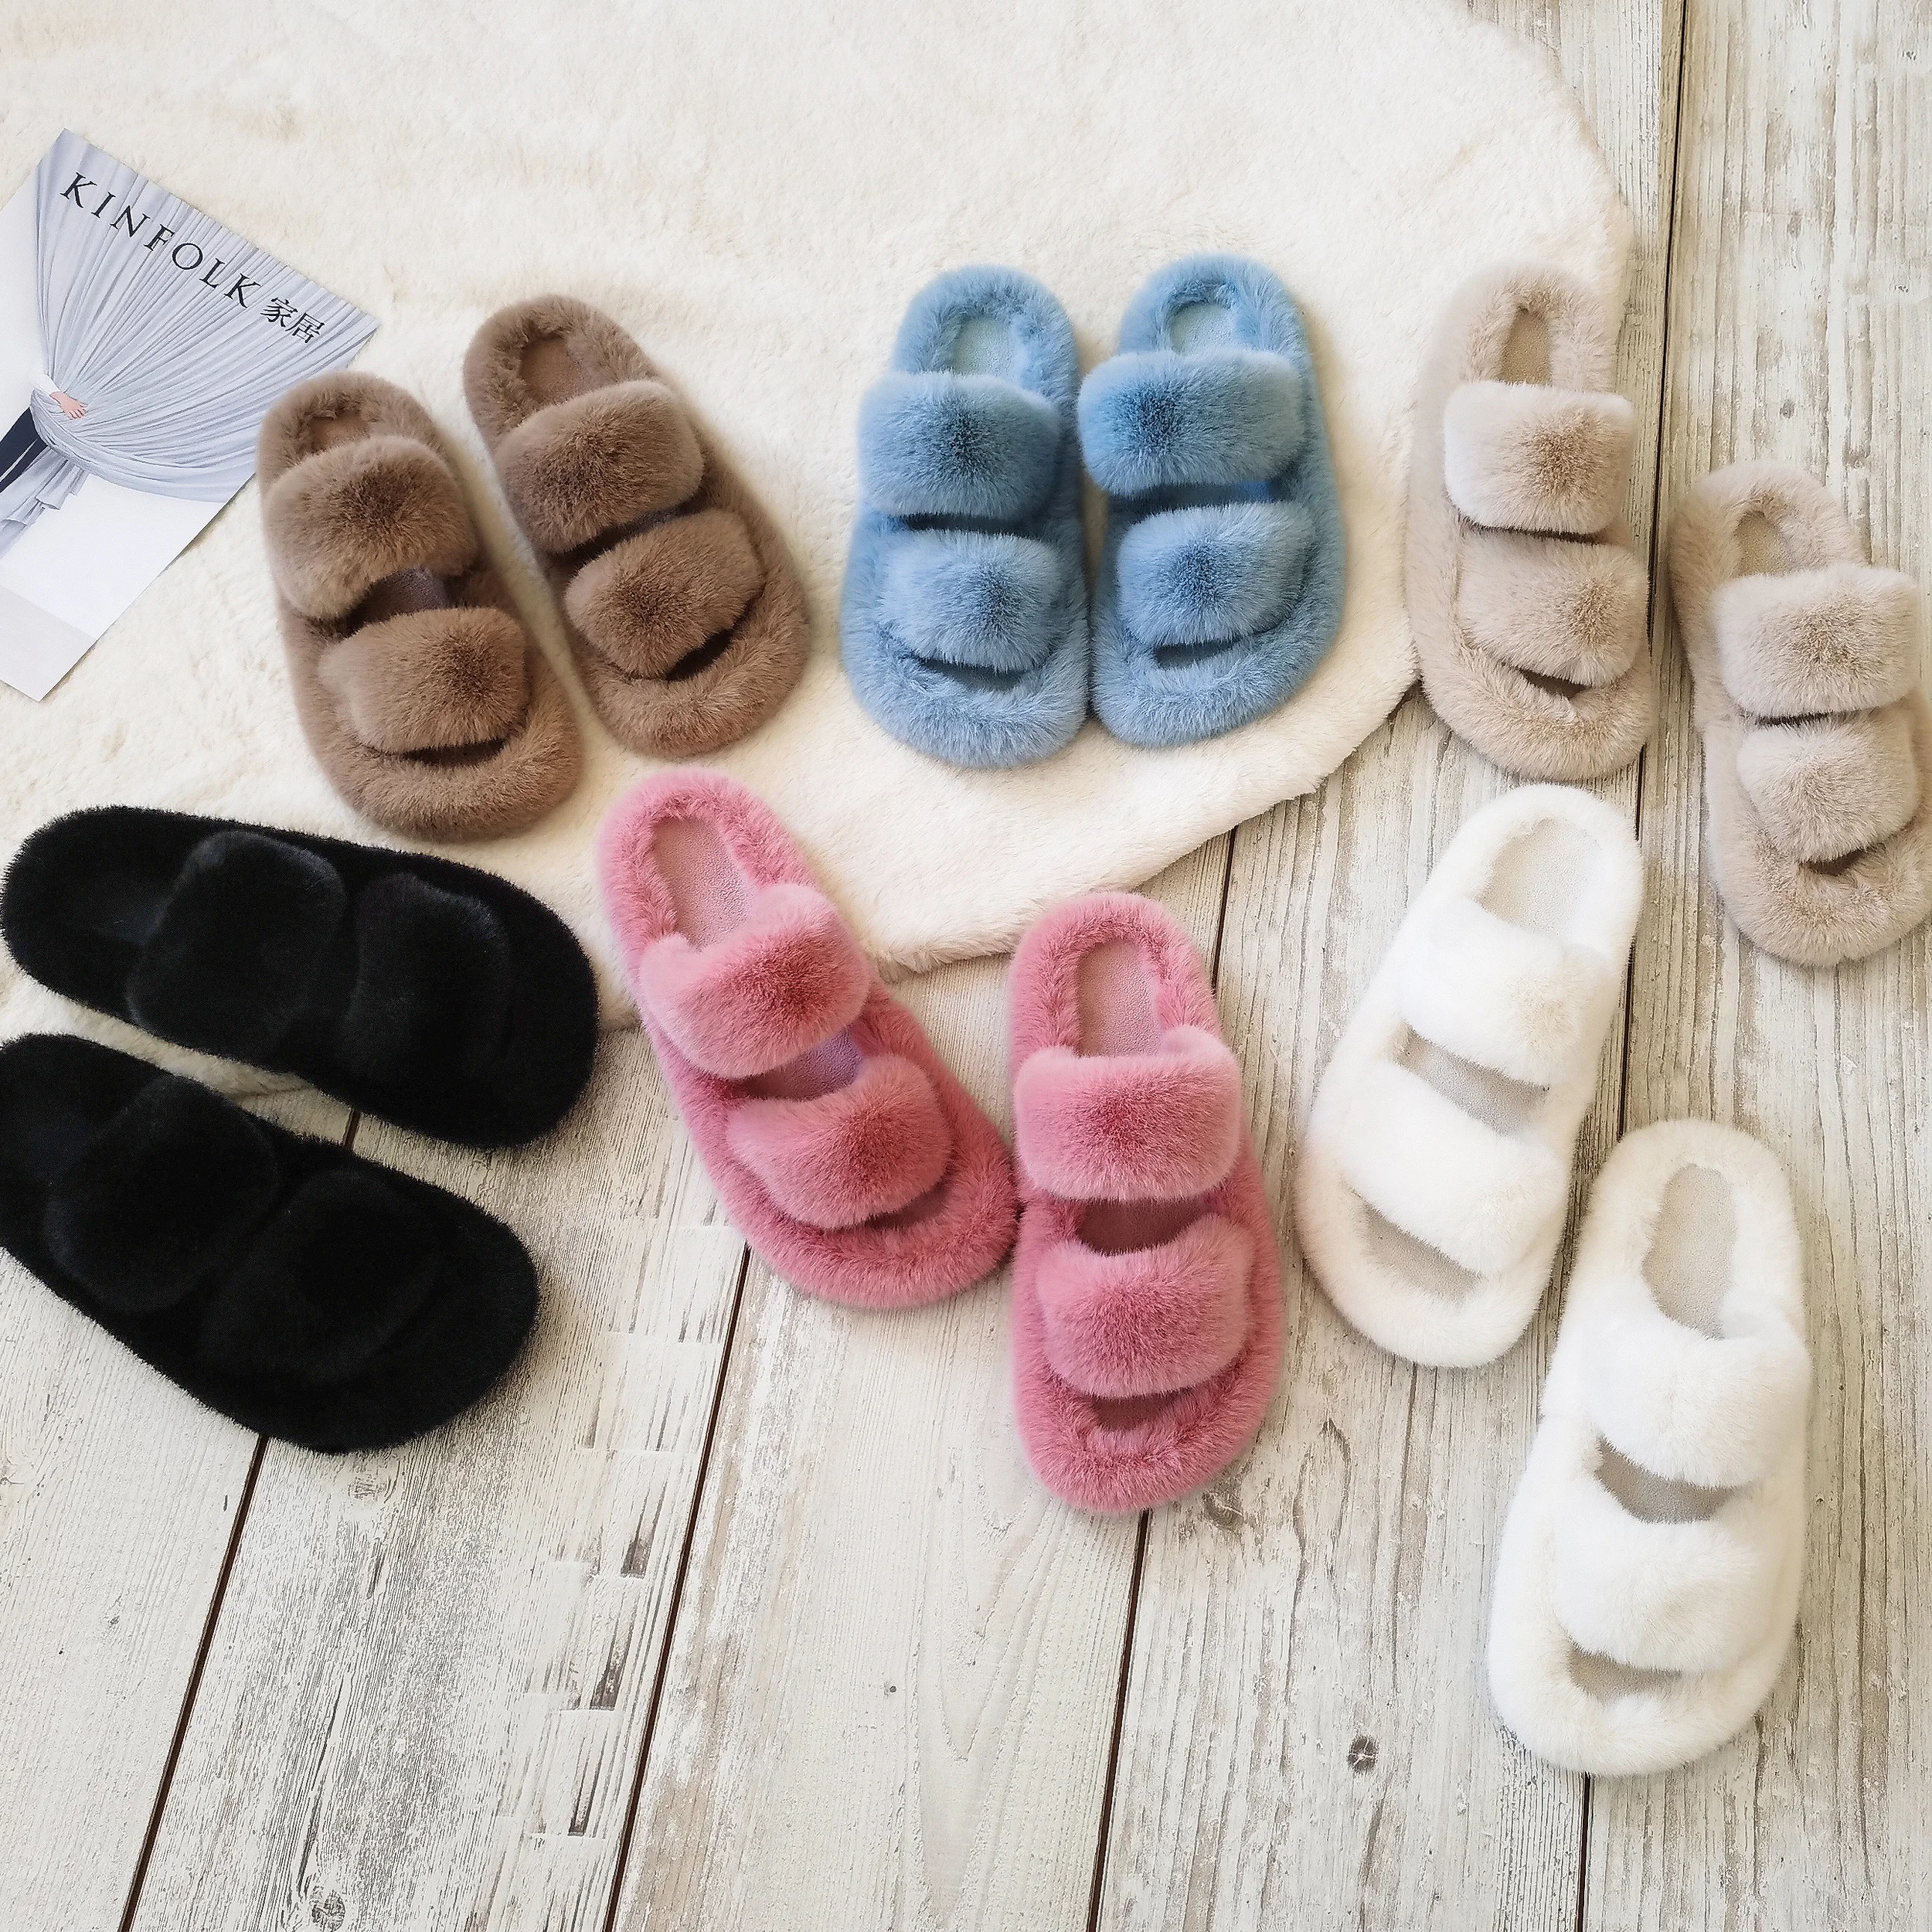 Fluffy Open Toe Indoor Slippers,Wholesale Women Faux Fur Slider Slippers -  Buy Faux Fur Slider Slippers,Women Indoor Slippers,Fluffy Open Toe Slippers  Product on Alibaba.com